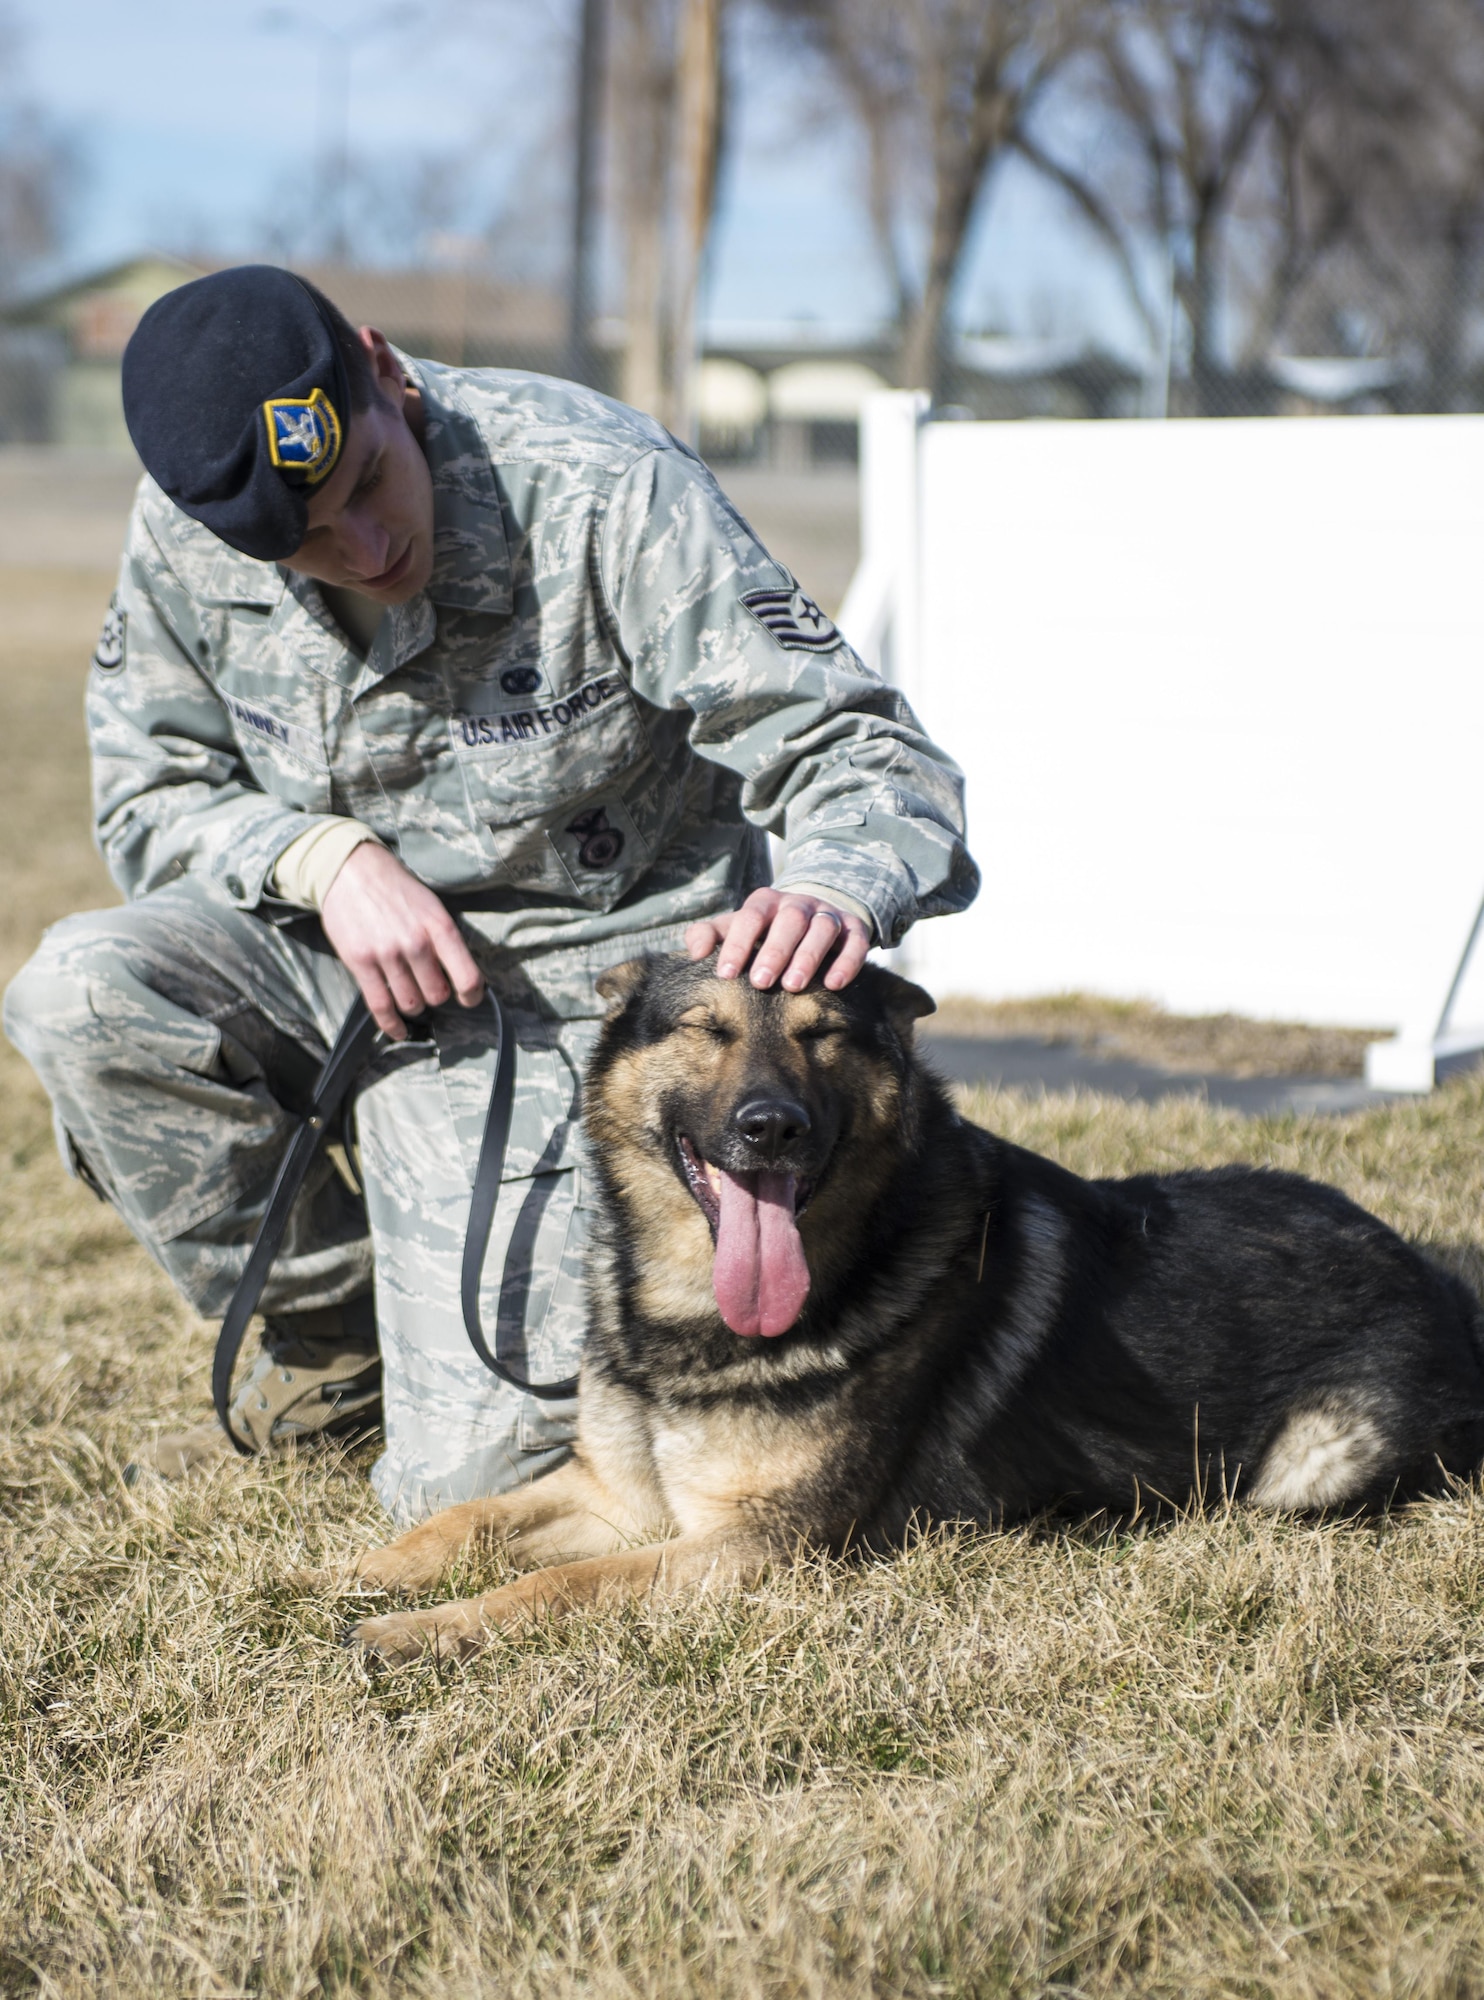 Staff Sgt. Benjamin Vanney, a 366th Security Forces Squadron military working dog (MWD) handler, sits with Rony Feb. 24, 2015, at Mountain Home Air Force Base, Idaho. By playing, Ronny and Vanney have formed a bond which is a crucial part of the MWD team. (U.S. Air Force photo/Senior Airman Malissa Lott)